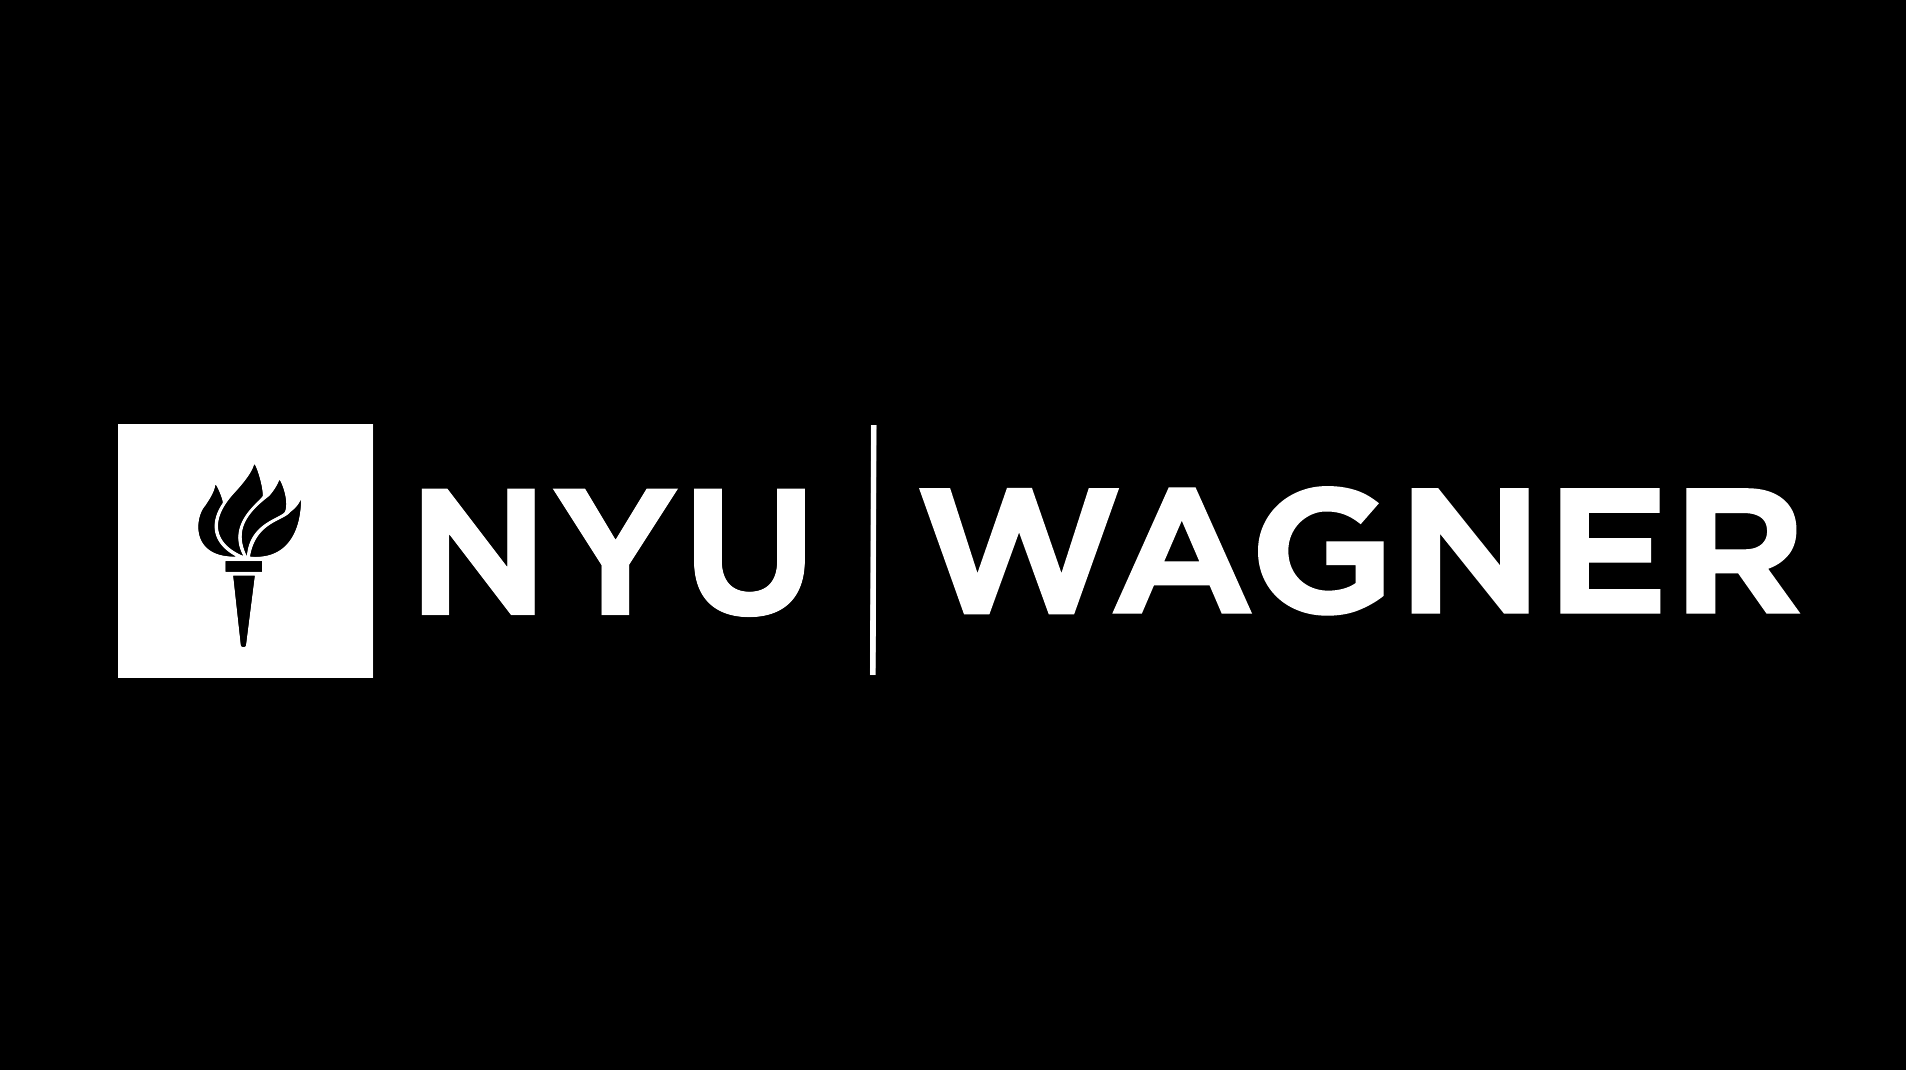 African Women’s Public Service Fellowship 2020 for Masters study at NYU Wagner